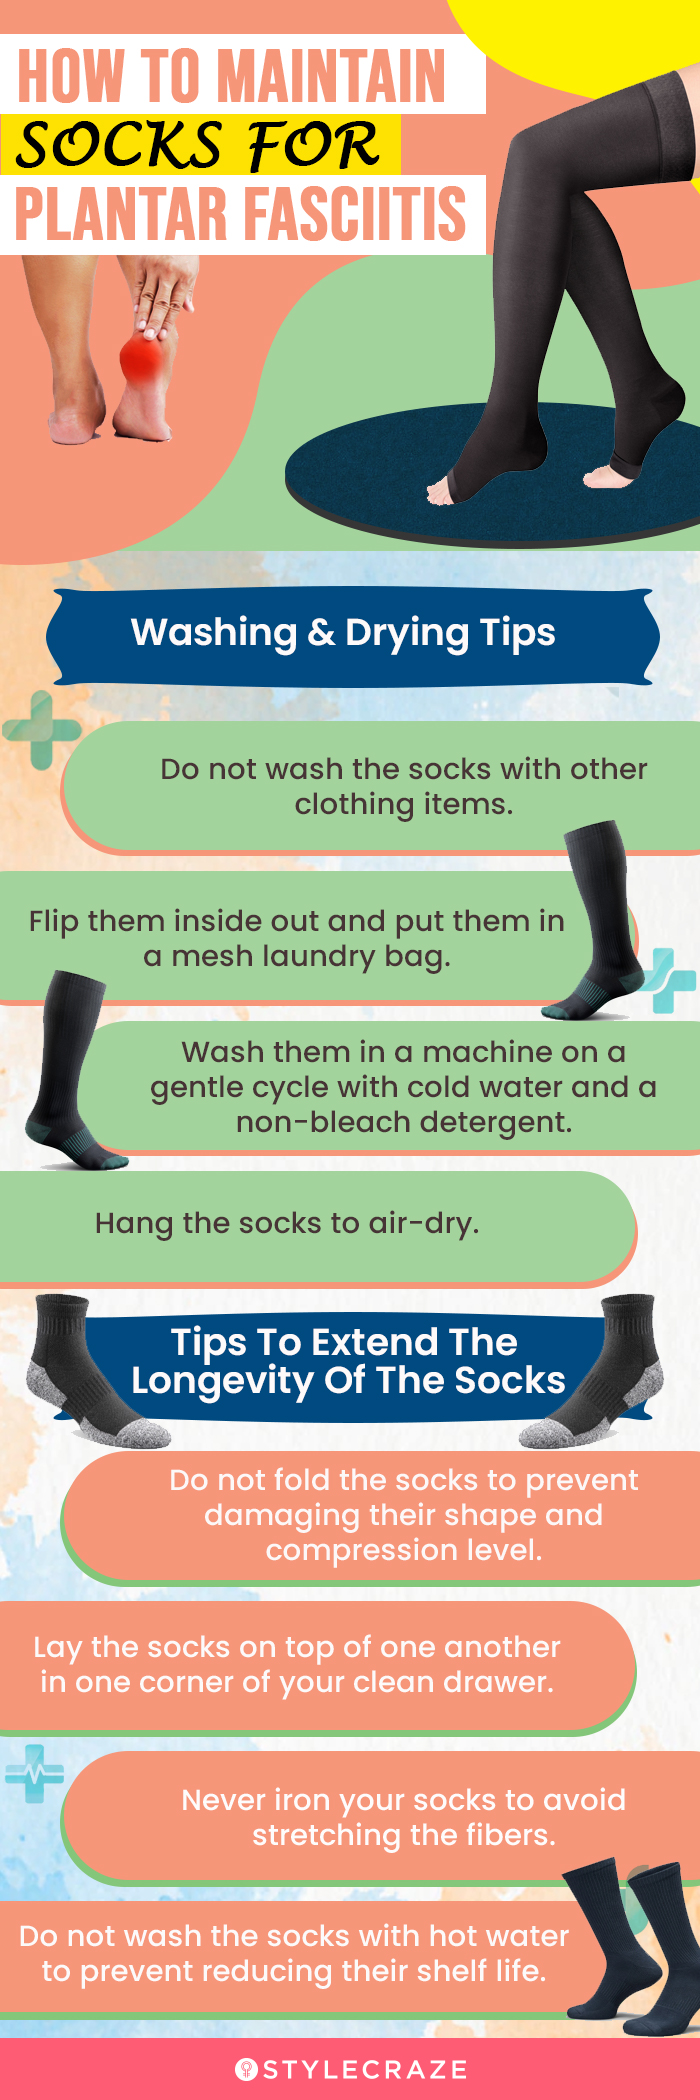 How To Maintain Socks For Plantar Fasciitis (infographic)